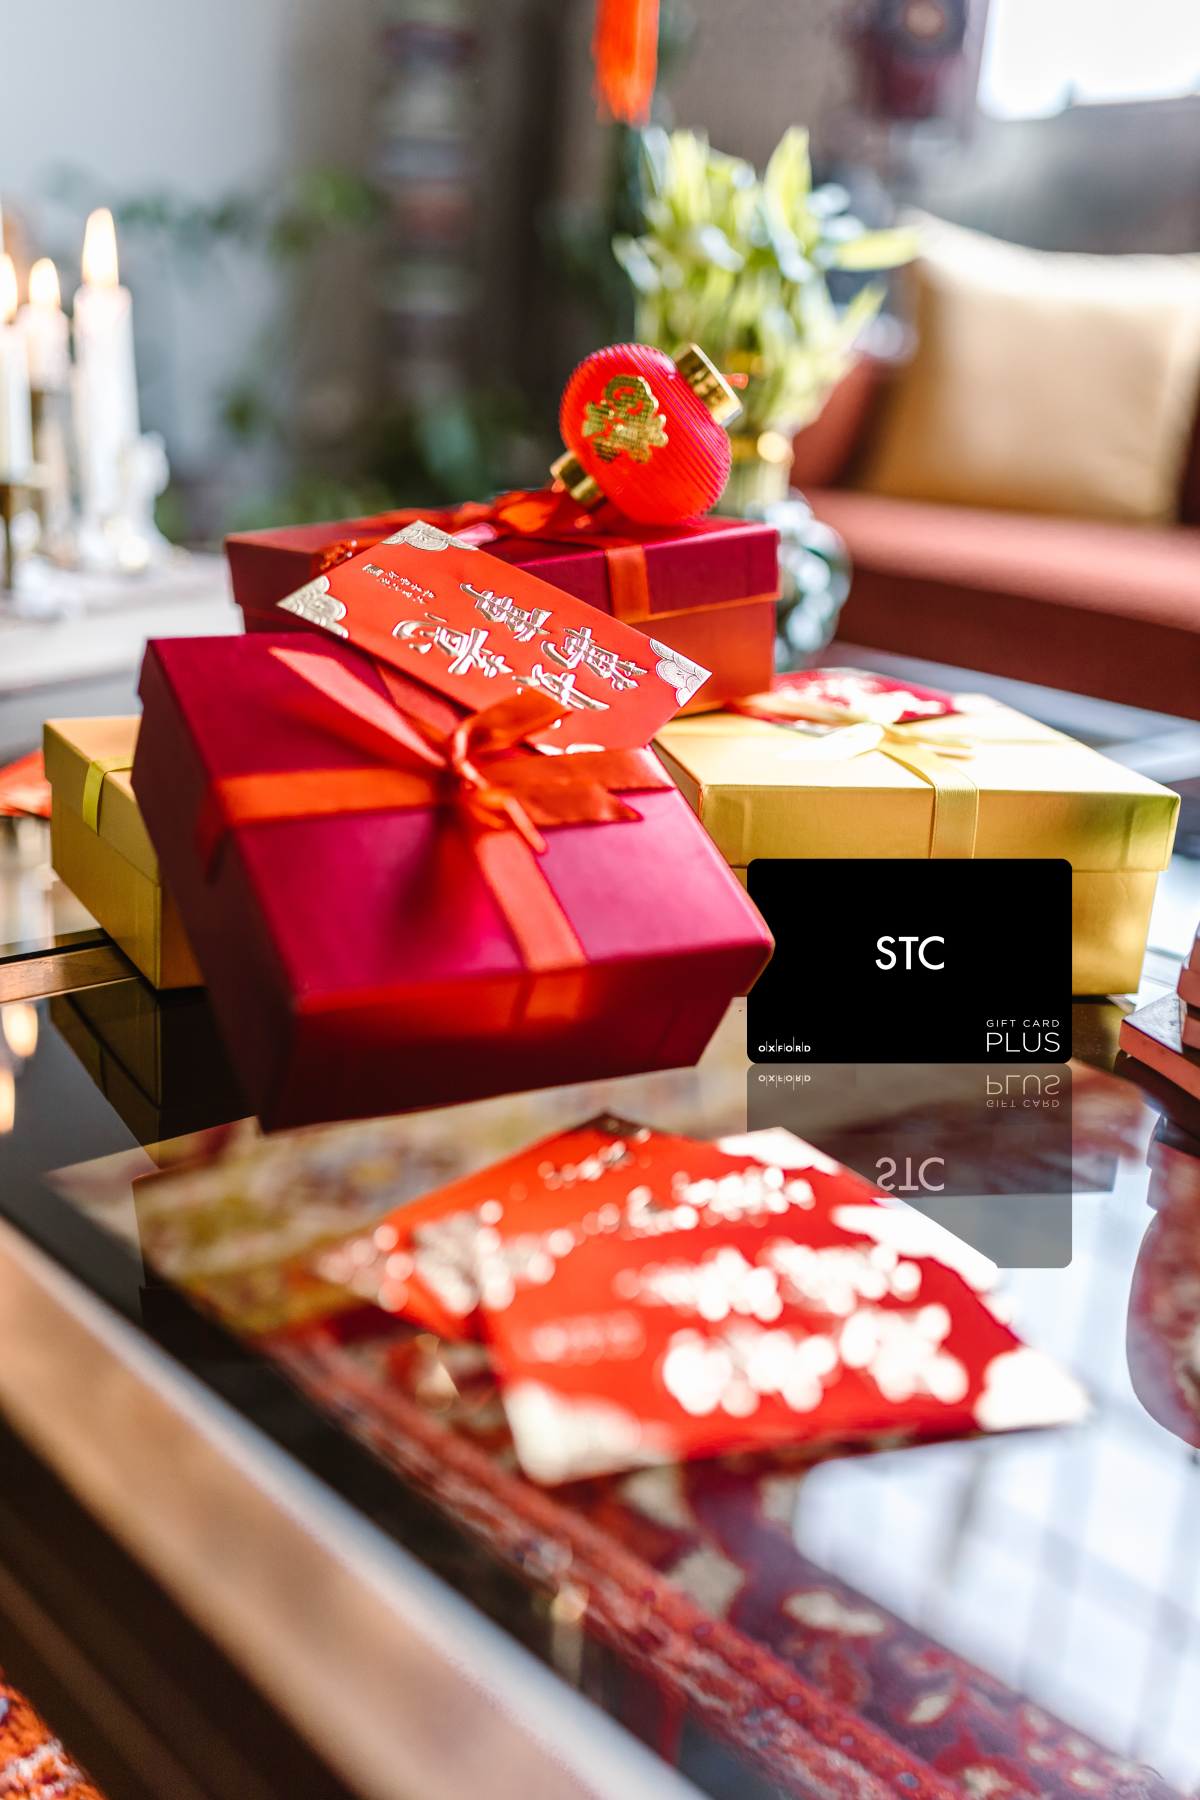 promotional image of a STC gift card for LNY